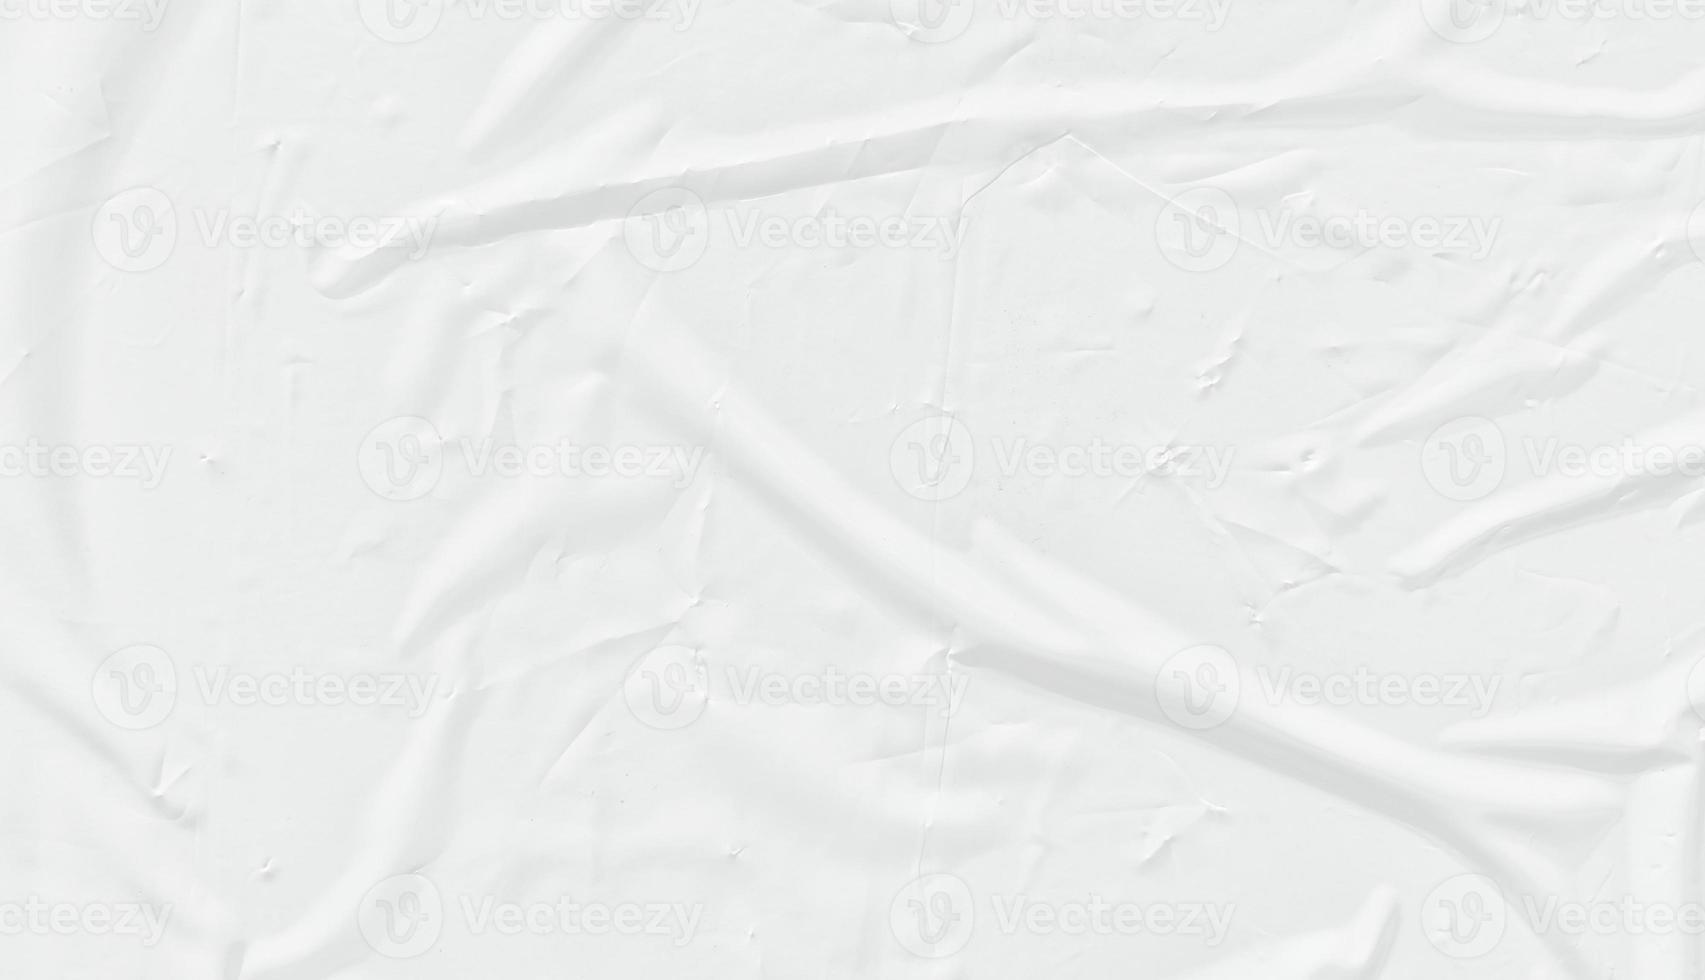 Crumpled paper texture background for various purposes. White wrinkled paper texture photo